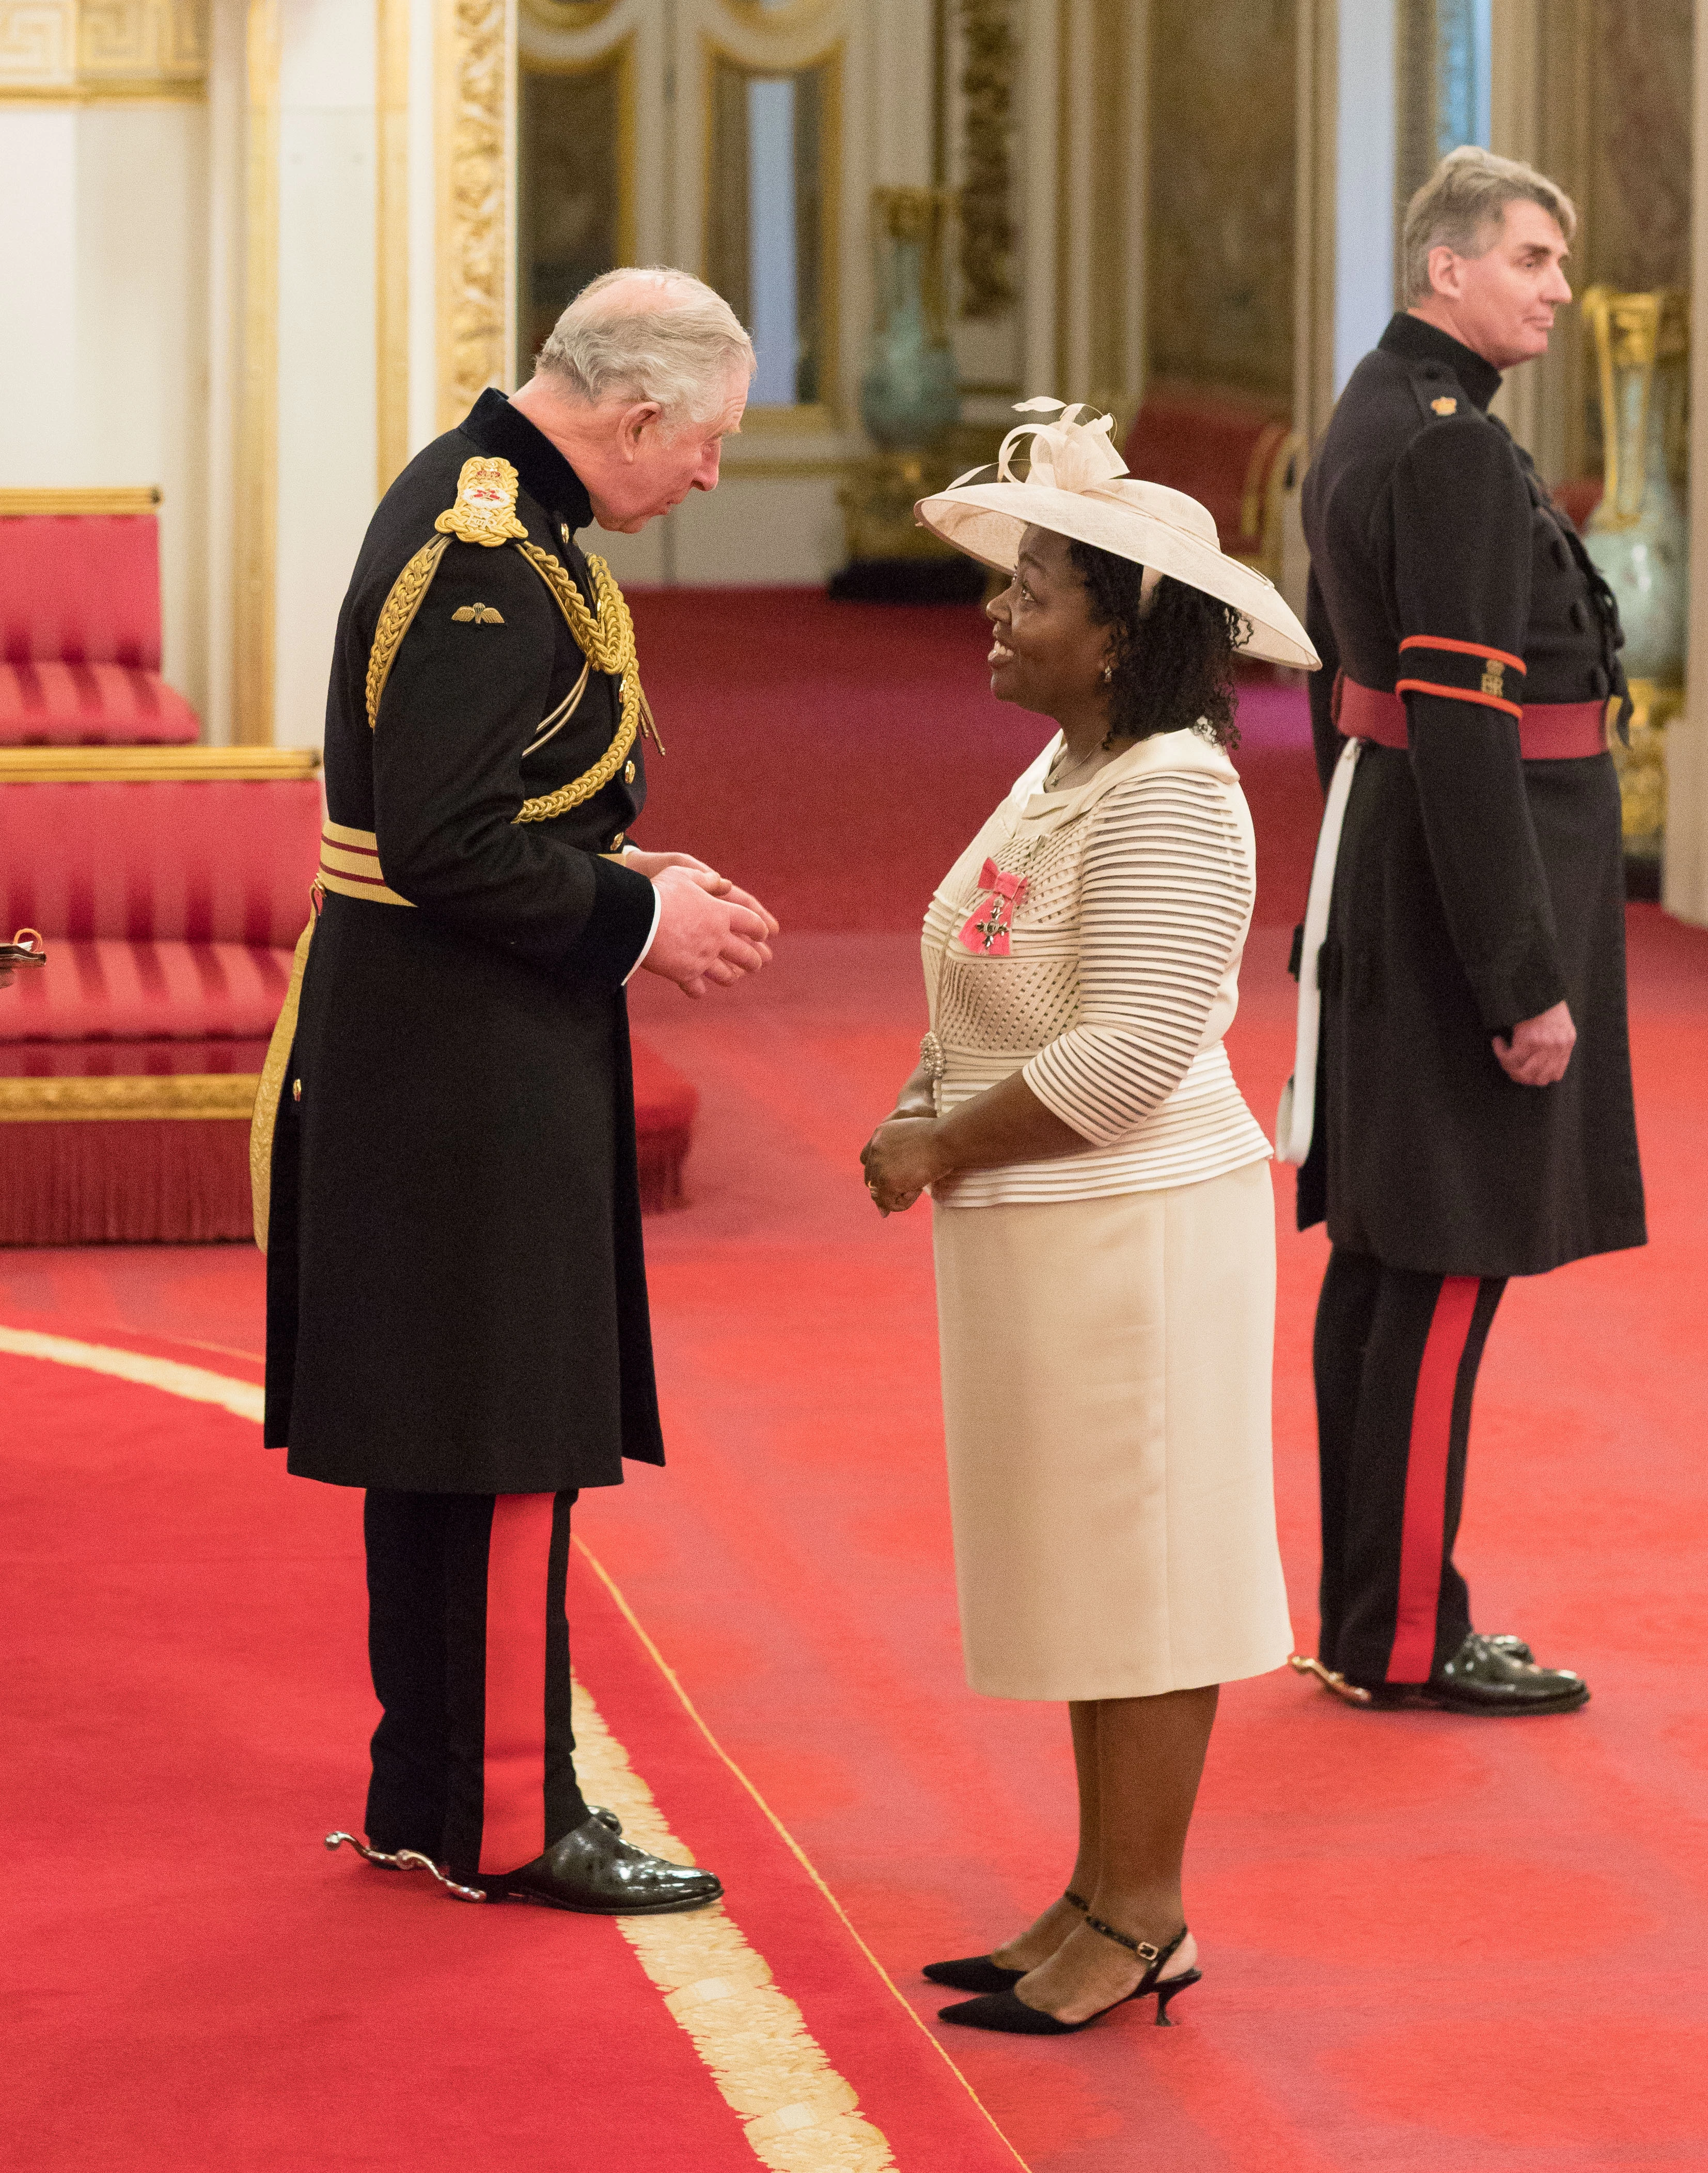 Olive Strachan receiving her MBE from HRH Prince Charles at Buckingham Palace